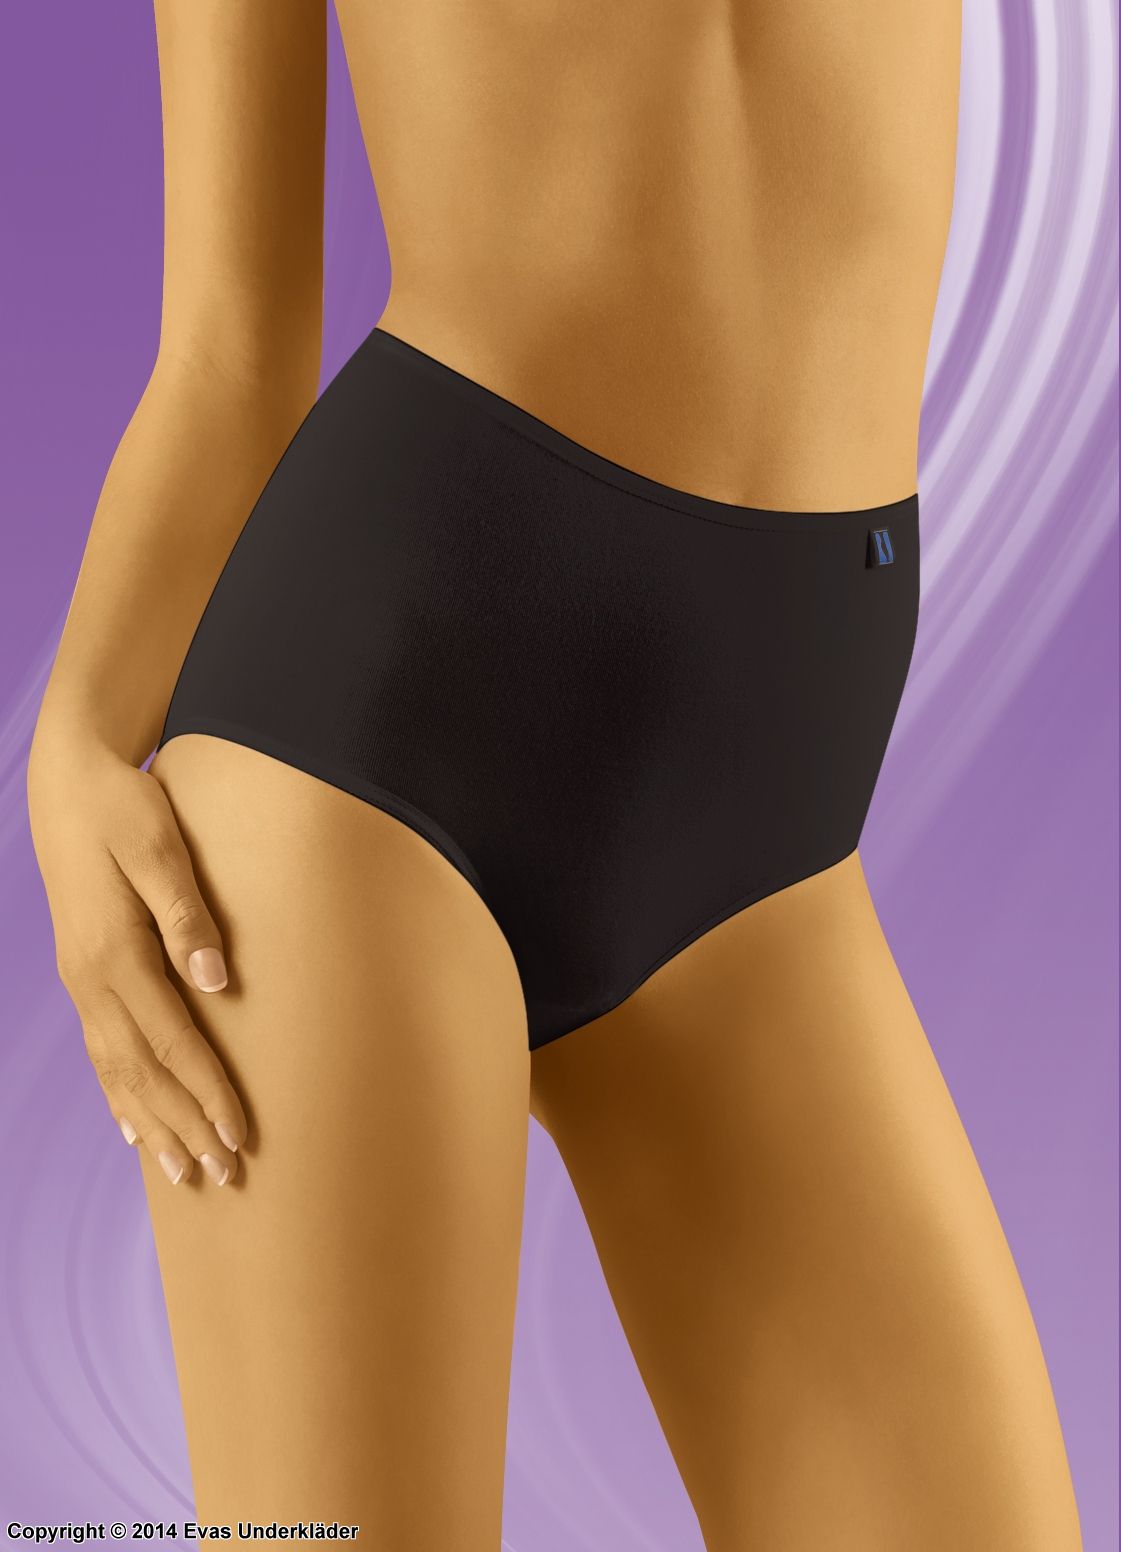 Maxi briefs, smooth and comfortable fabric, high waist, S to 3XL